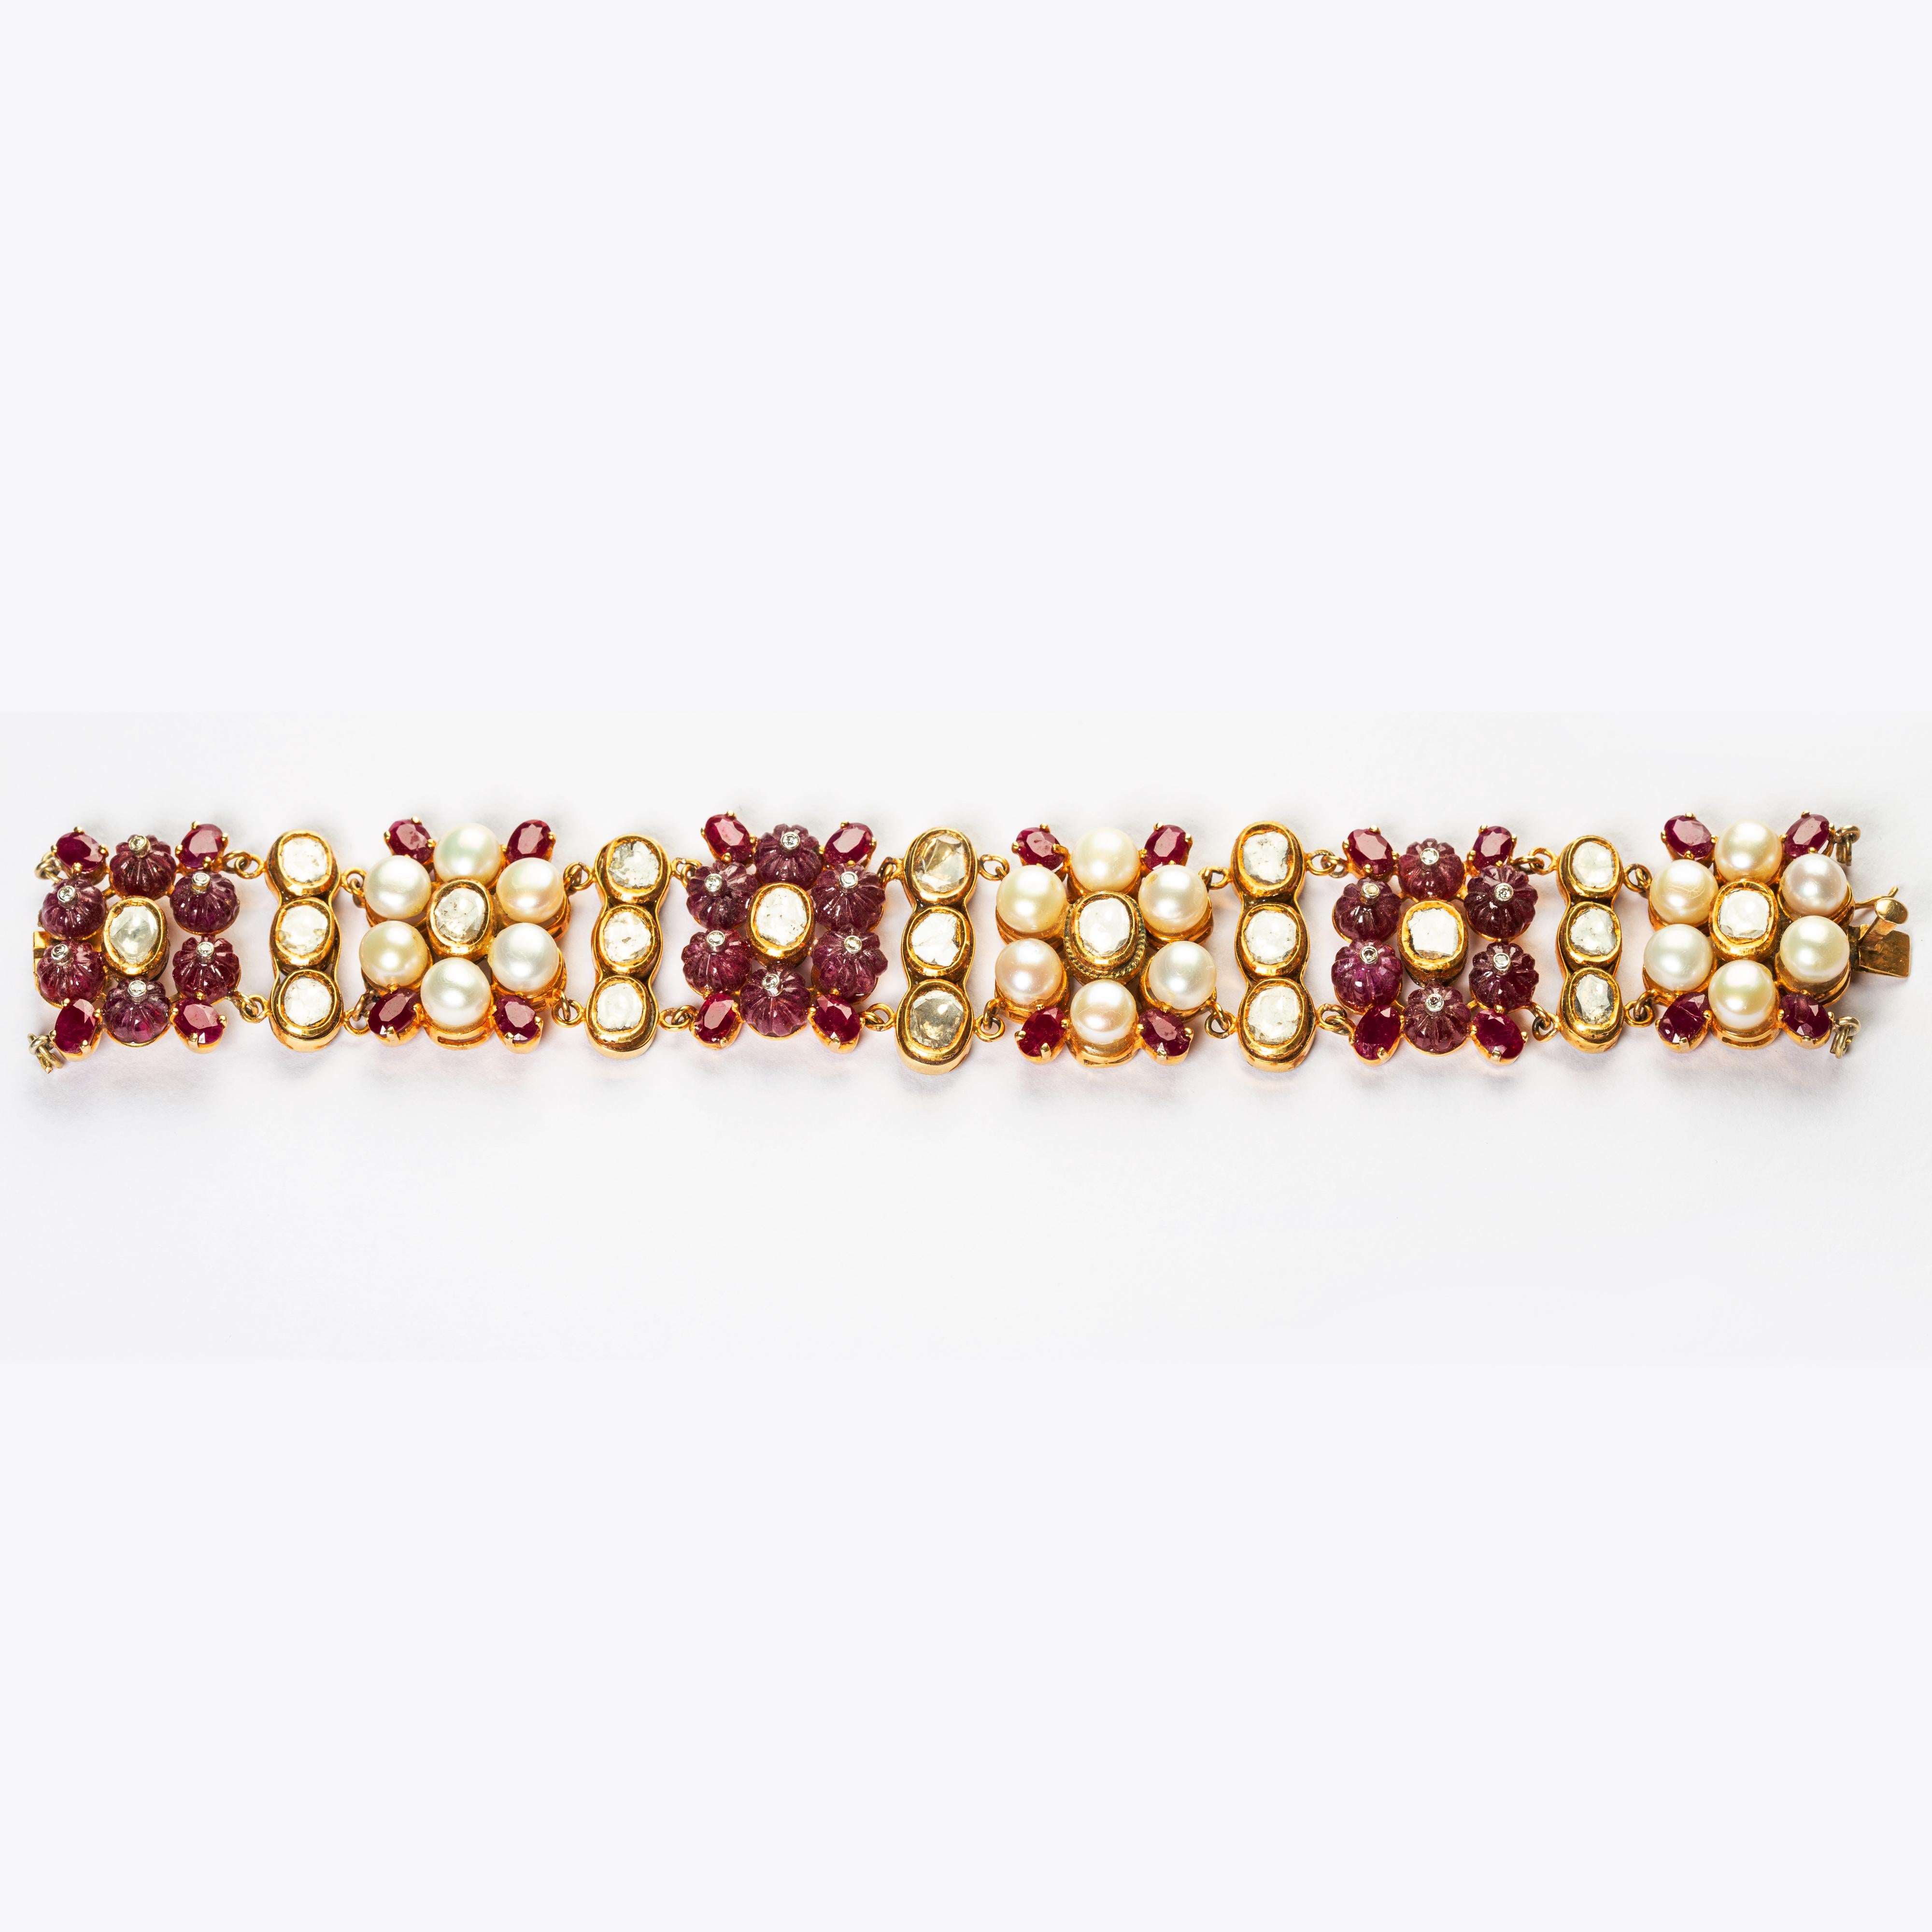 “Shahi Lal Dera Bracelet“ 

Inspired by the 17th century Royal Red Tent commissioned by the Mogul Emperor Shahjahan, the builder of the Taj Mahal, to be used while traveling. 

22kt gold handcrafted Bracelet with 0.29 carats of Diamonds, 15.08gm